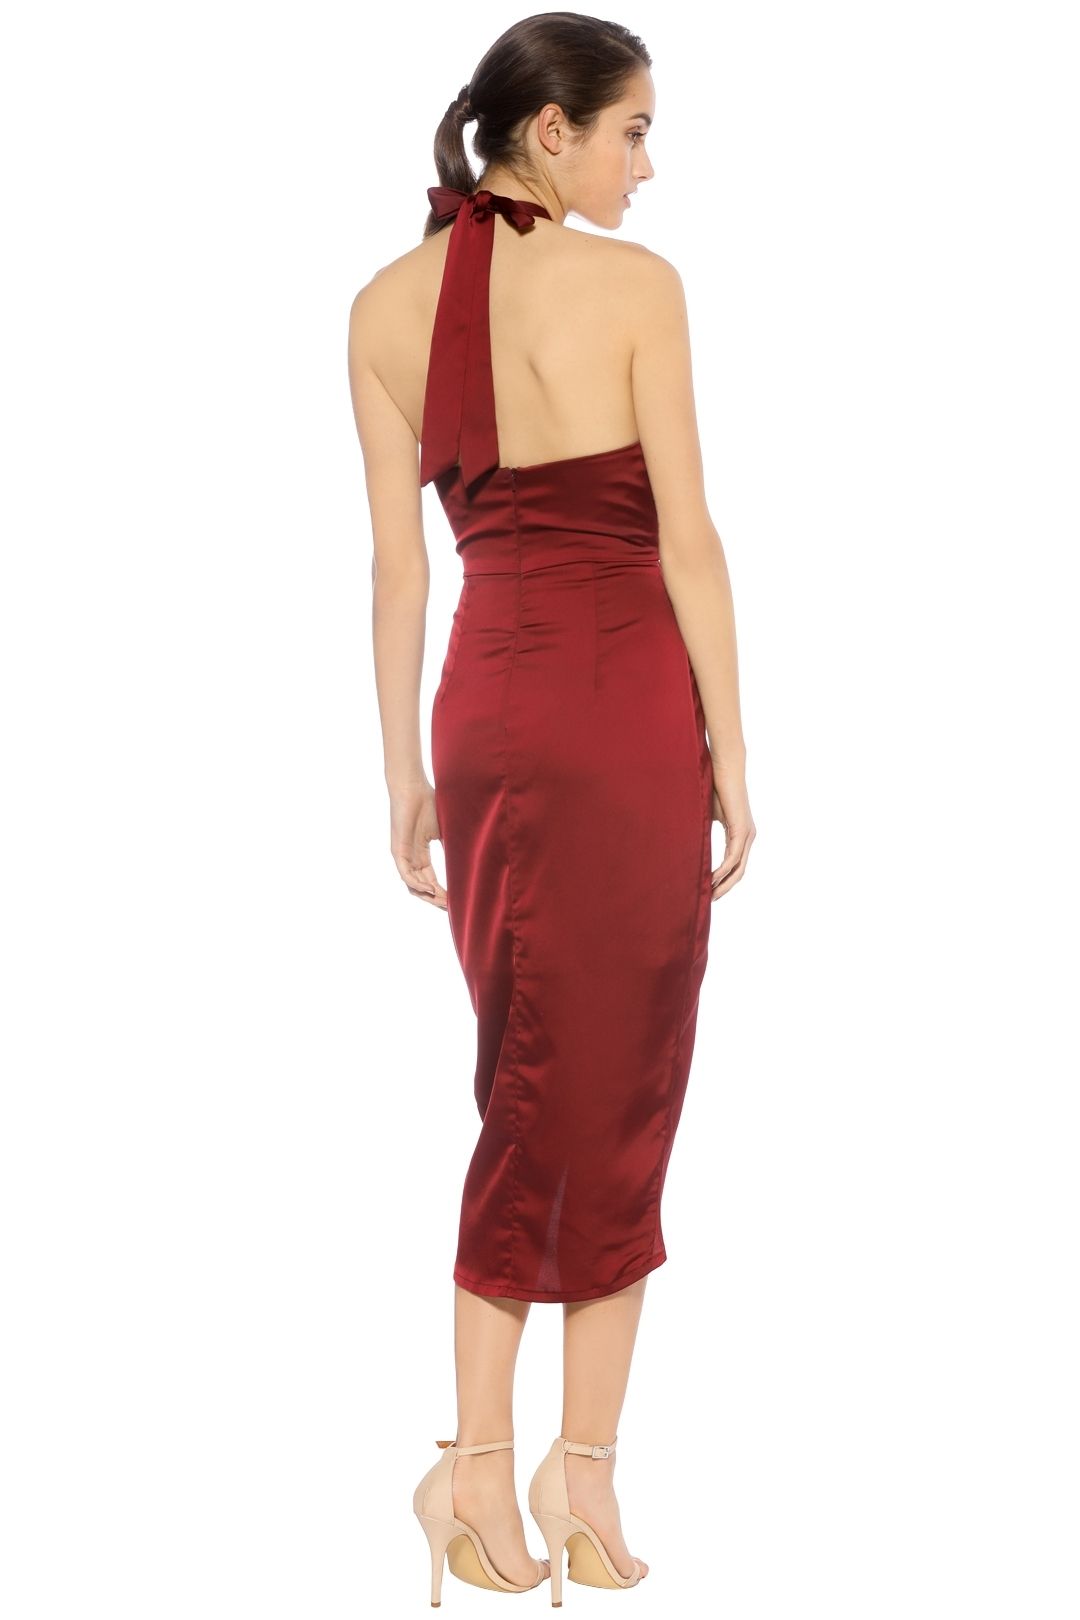 Premonition - Pinot Cocktail Dress - Wine - Back